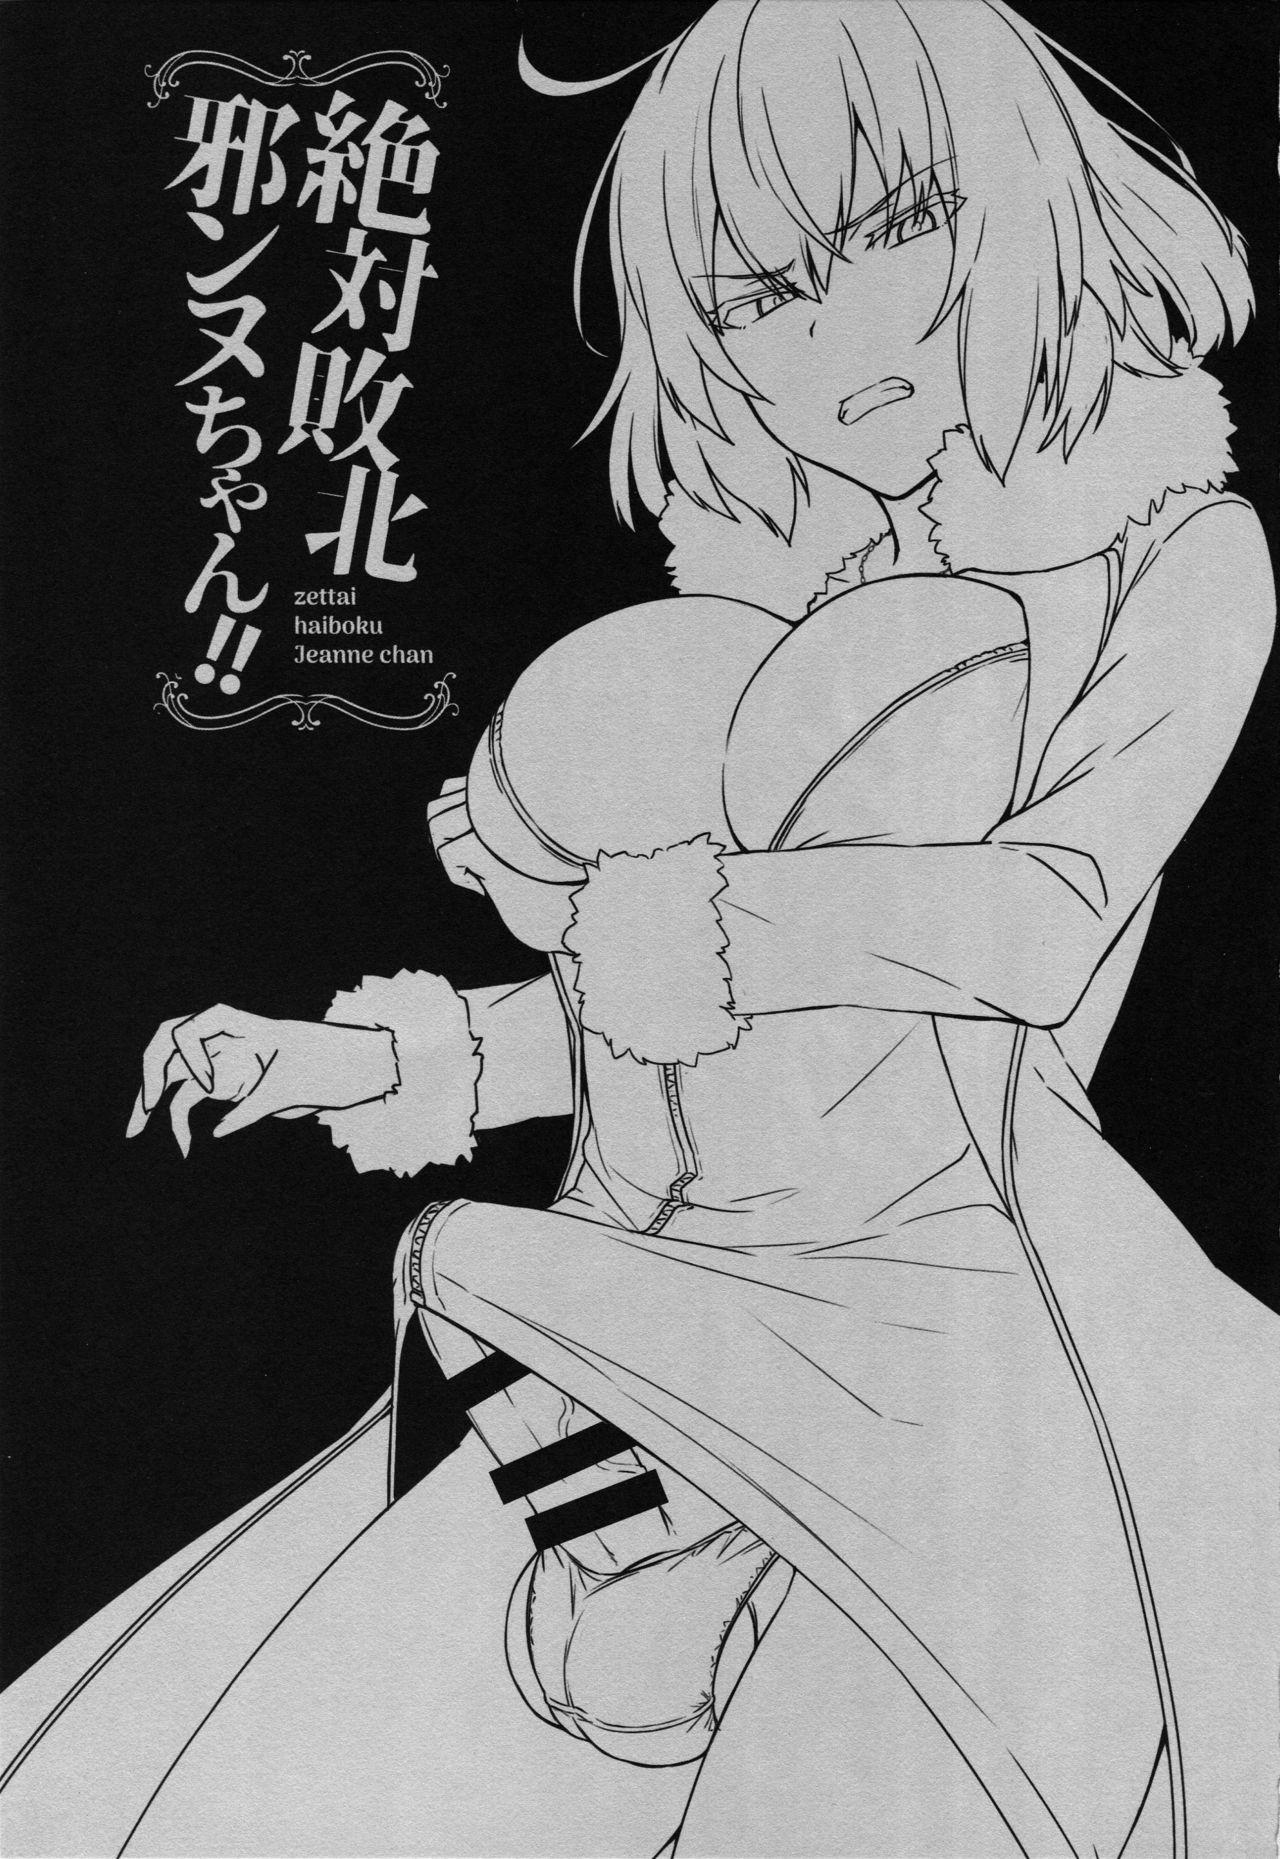 Passionate Zettai Haiboku Jeanne-chan!! - Fate grand order Old Young - Page 3